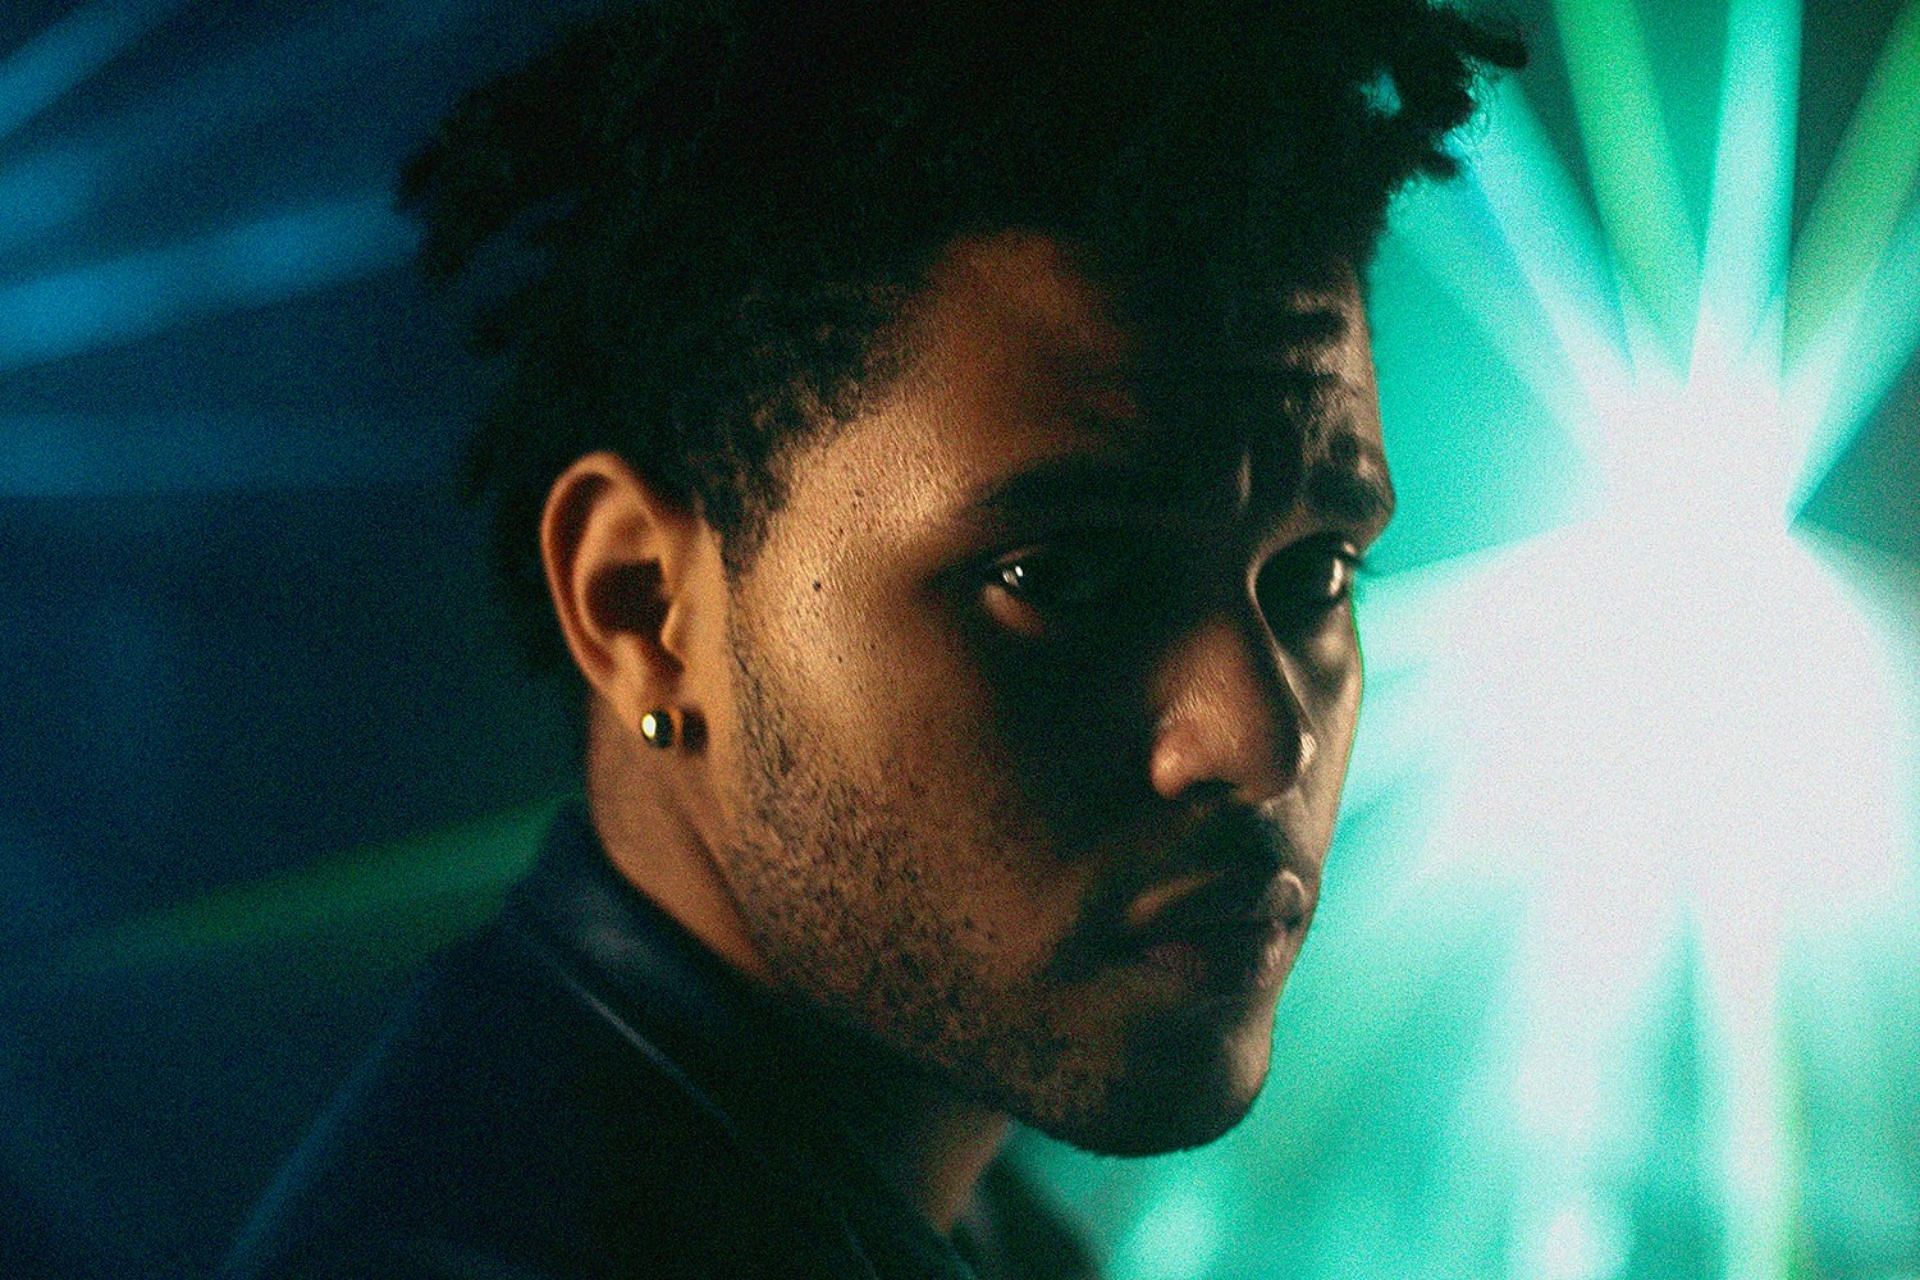 Thinking about the weekend. The Weeknd. Эйбел Тесфайе. Рэпер weekend. Еру цшсутв.